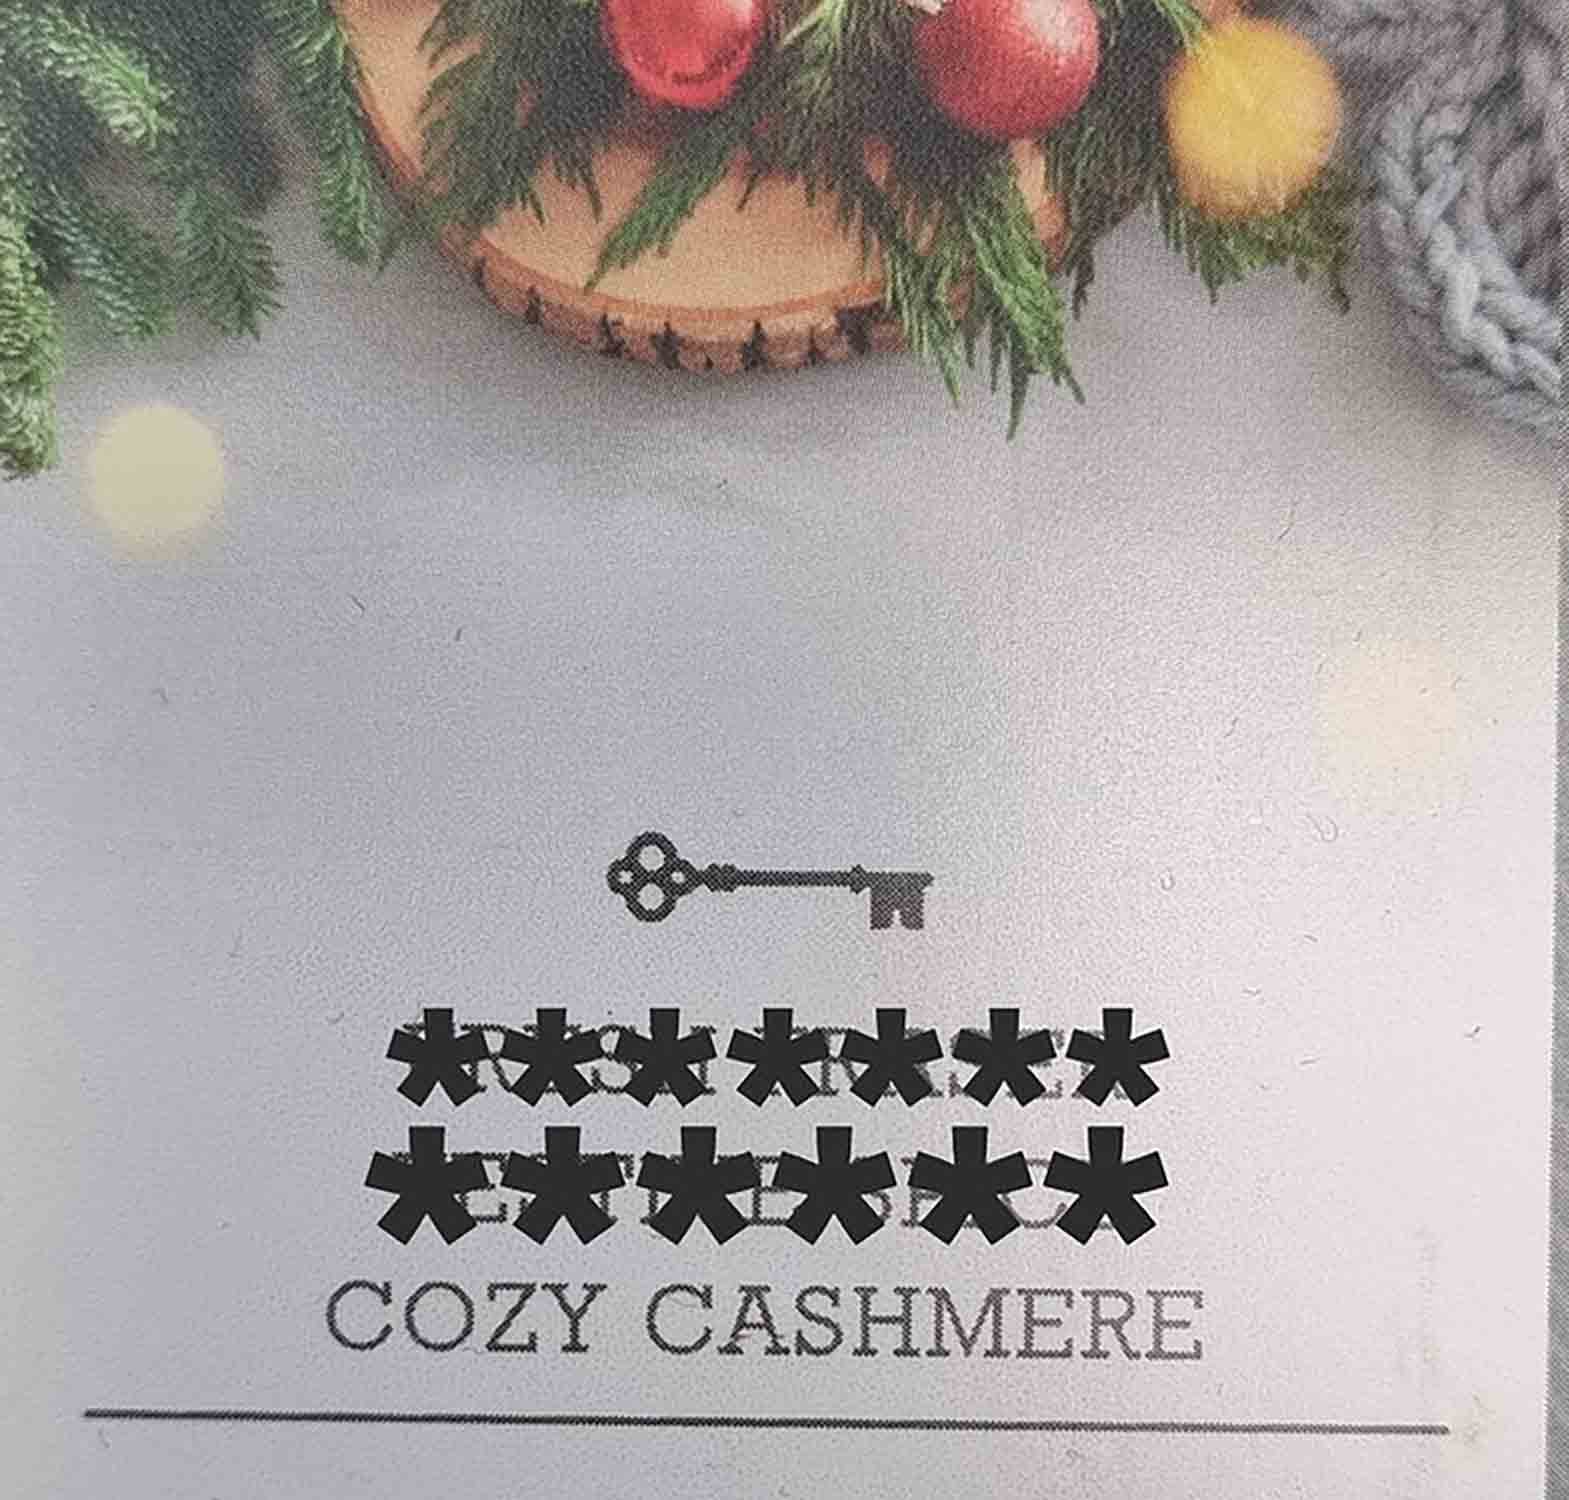 Cozy Cashmere USA 22g - Crumble vosk